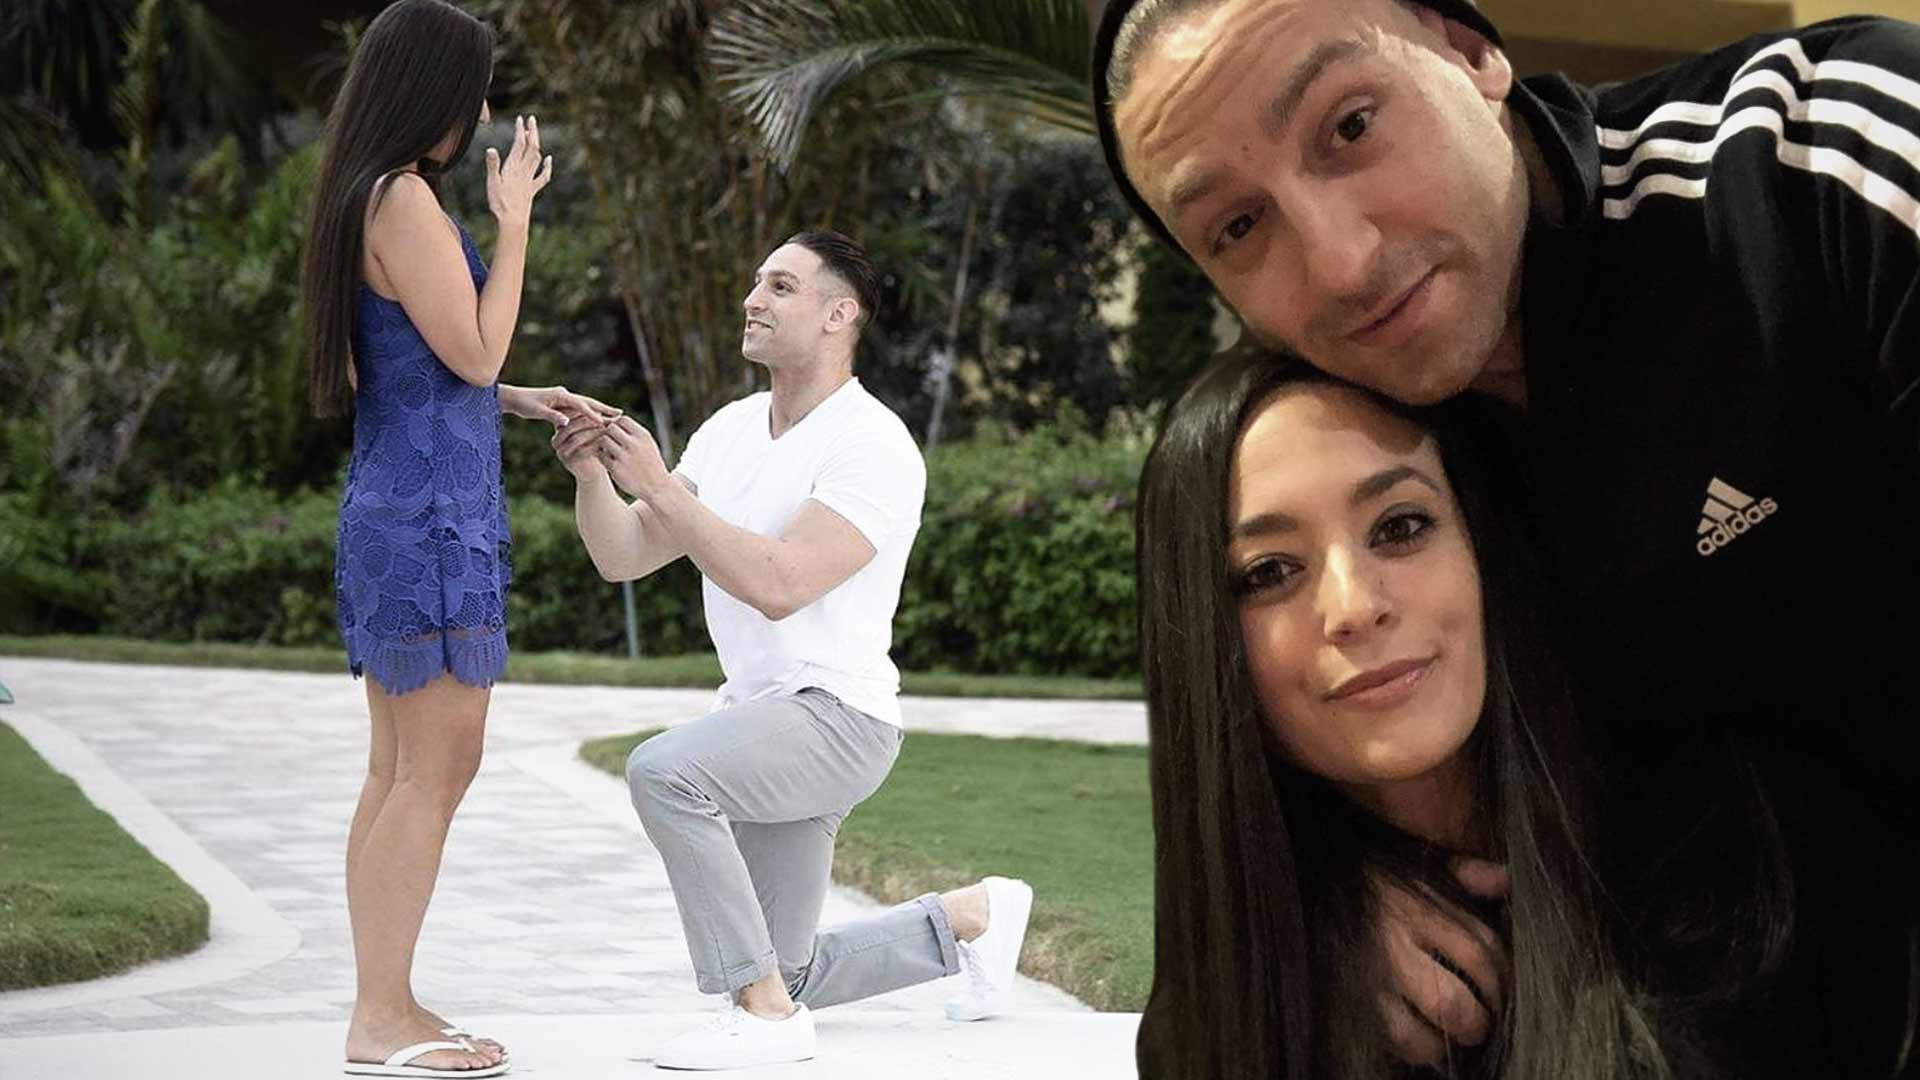 ‘Jersey Shore’ Star Sammi ‘Sweetheart’ Giancola Is Engaged to Longtime Boyfriend